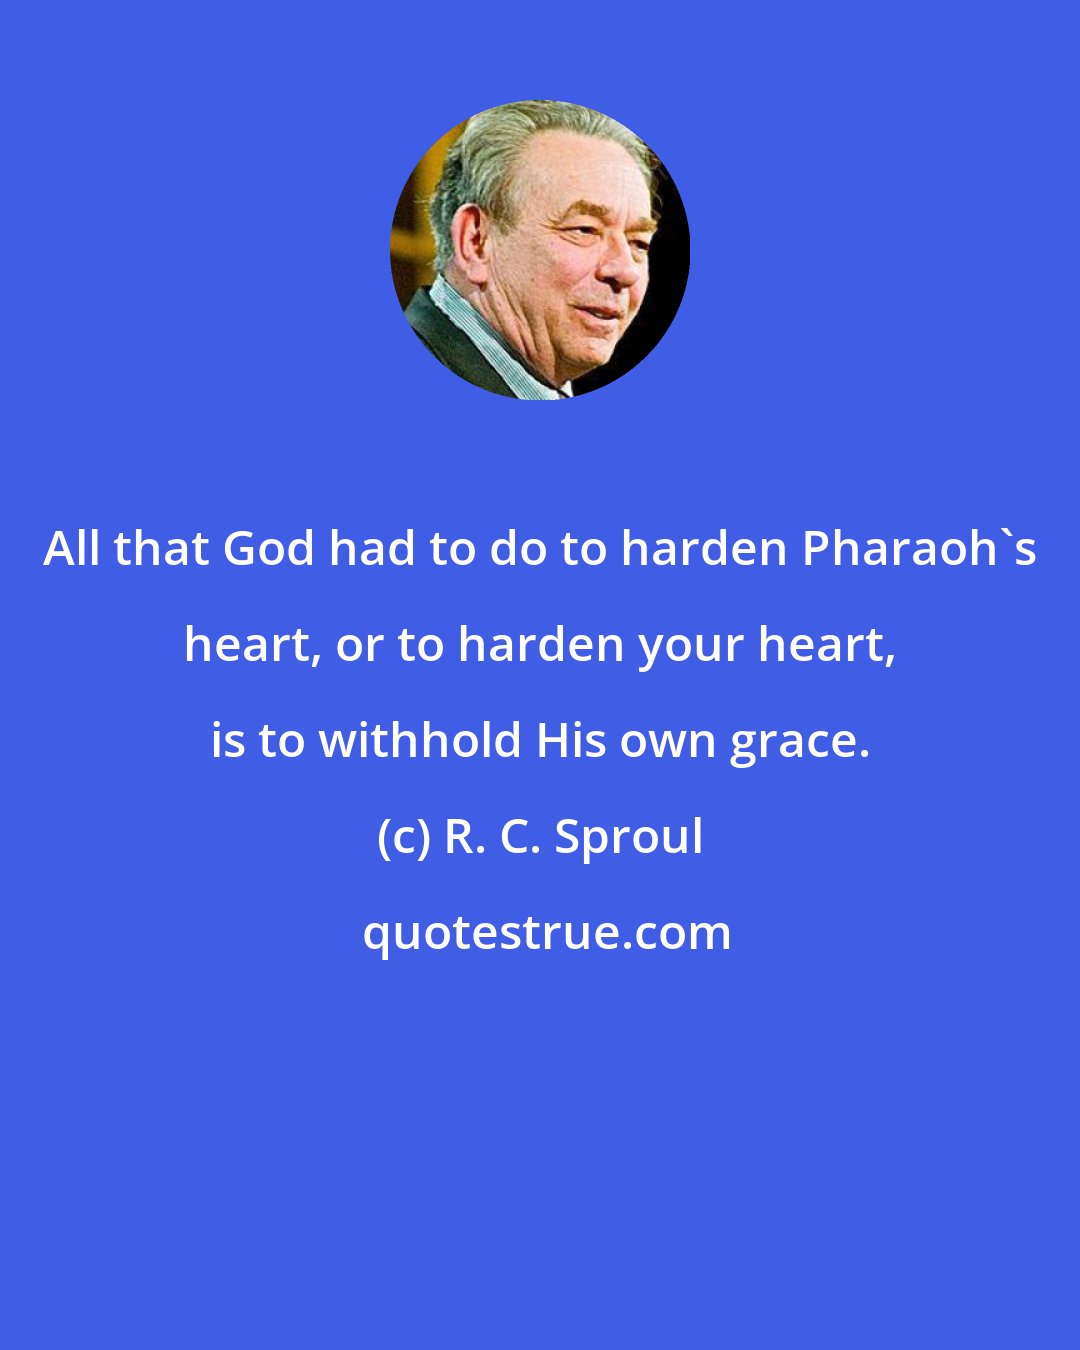 R. C. Sproul: All that God had to do to harden Pharaoh's heart, or to harden your heart, is to withhold His own grace.